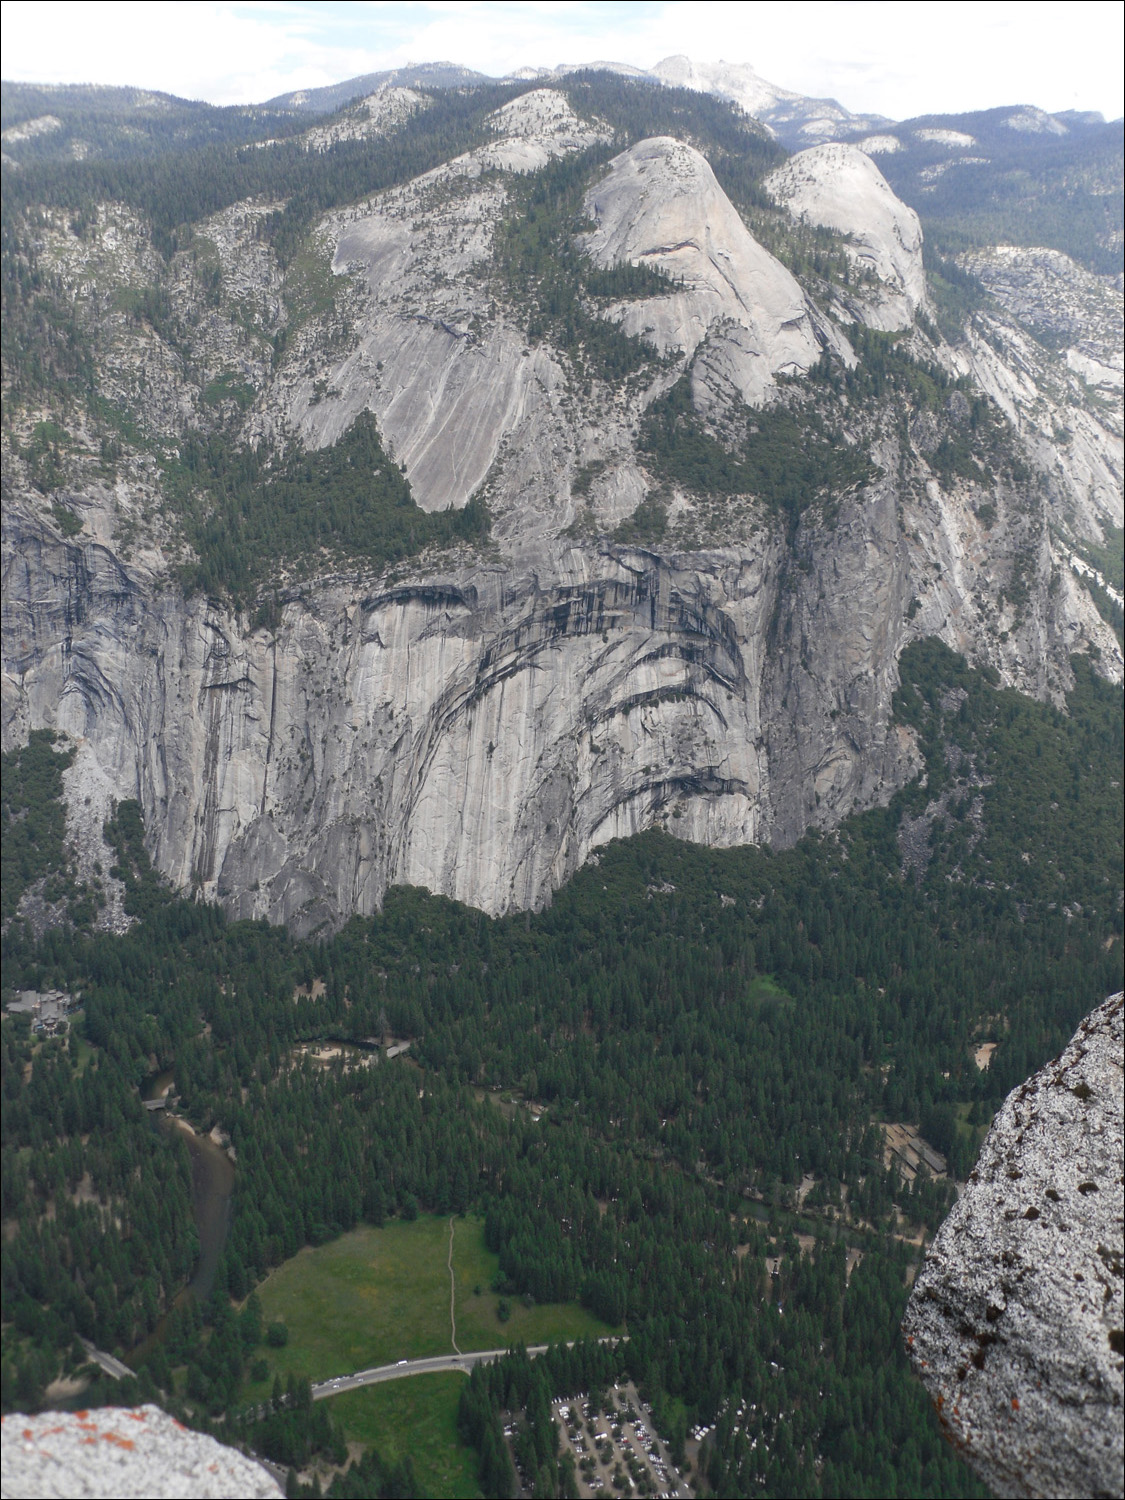 Hike up to Glacier Point- View of Cathedral arches from Glacier Point